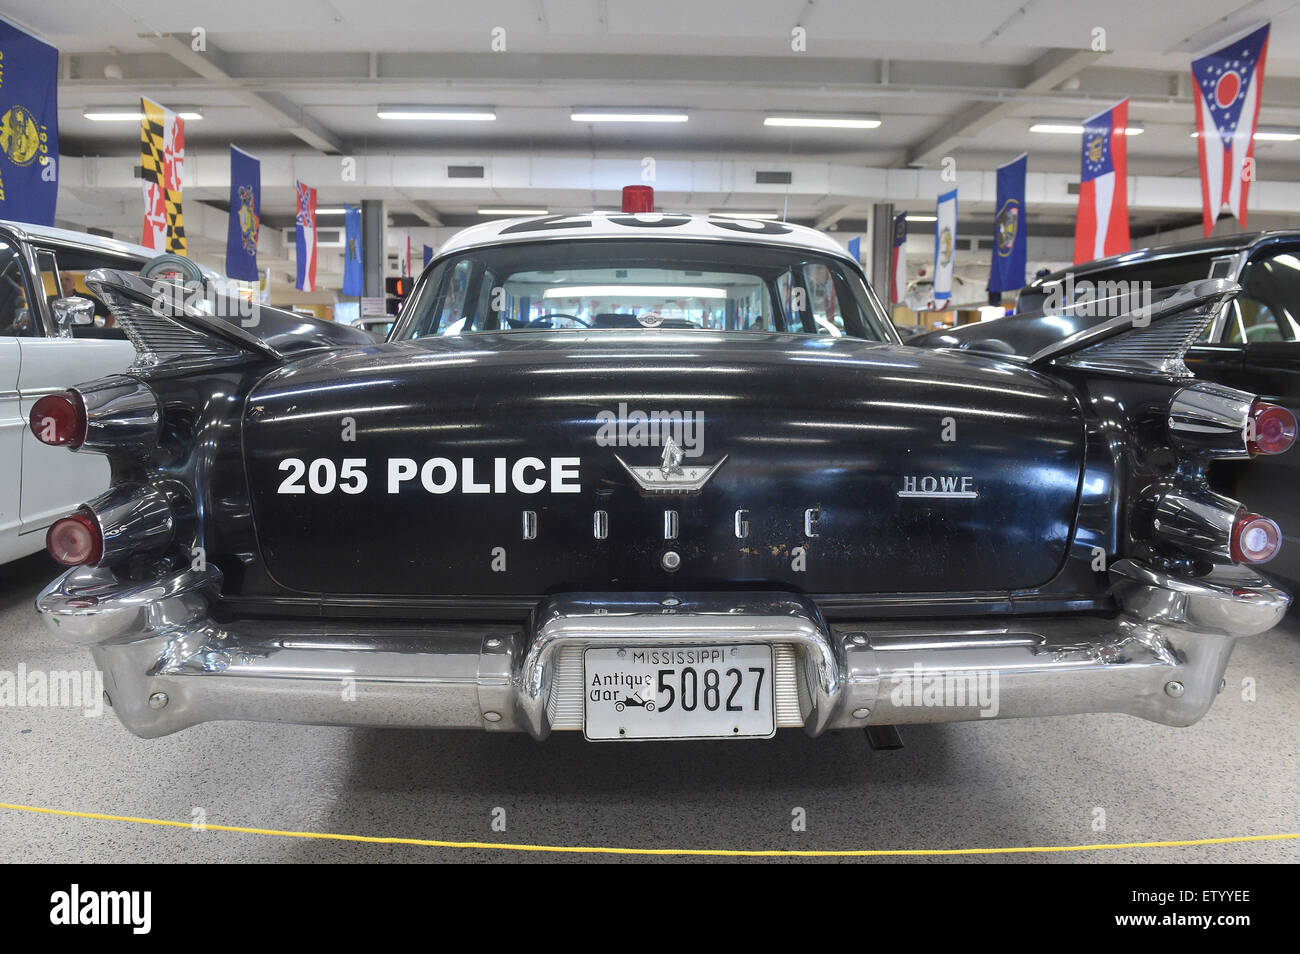 Ostrava, Czech Republic. 16th June, 2015. Exhibition called American Classic Cars from 1930 to 1980 launched today in Ostrava, Czech Republic, June 16, 2015. In the picture is seen police car Dodge Coronet from year 1959. © Jaroslav Ozana/CTK Photo/Alamy Live News Stock Photo